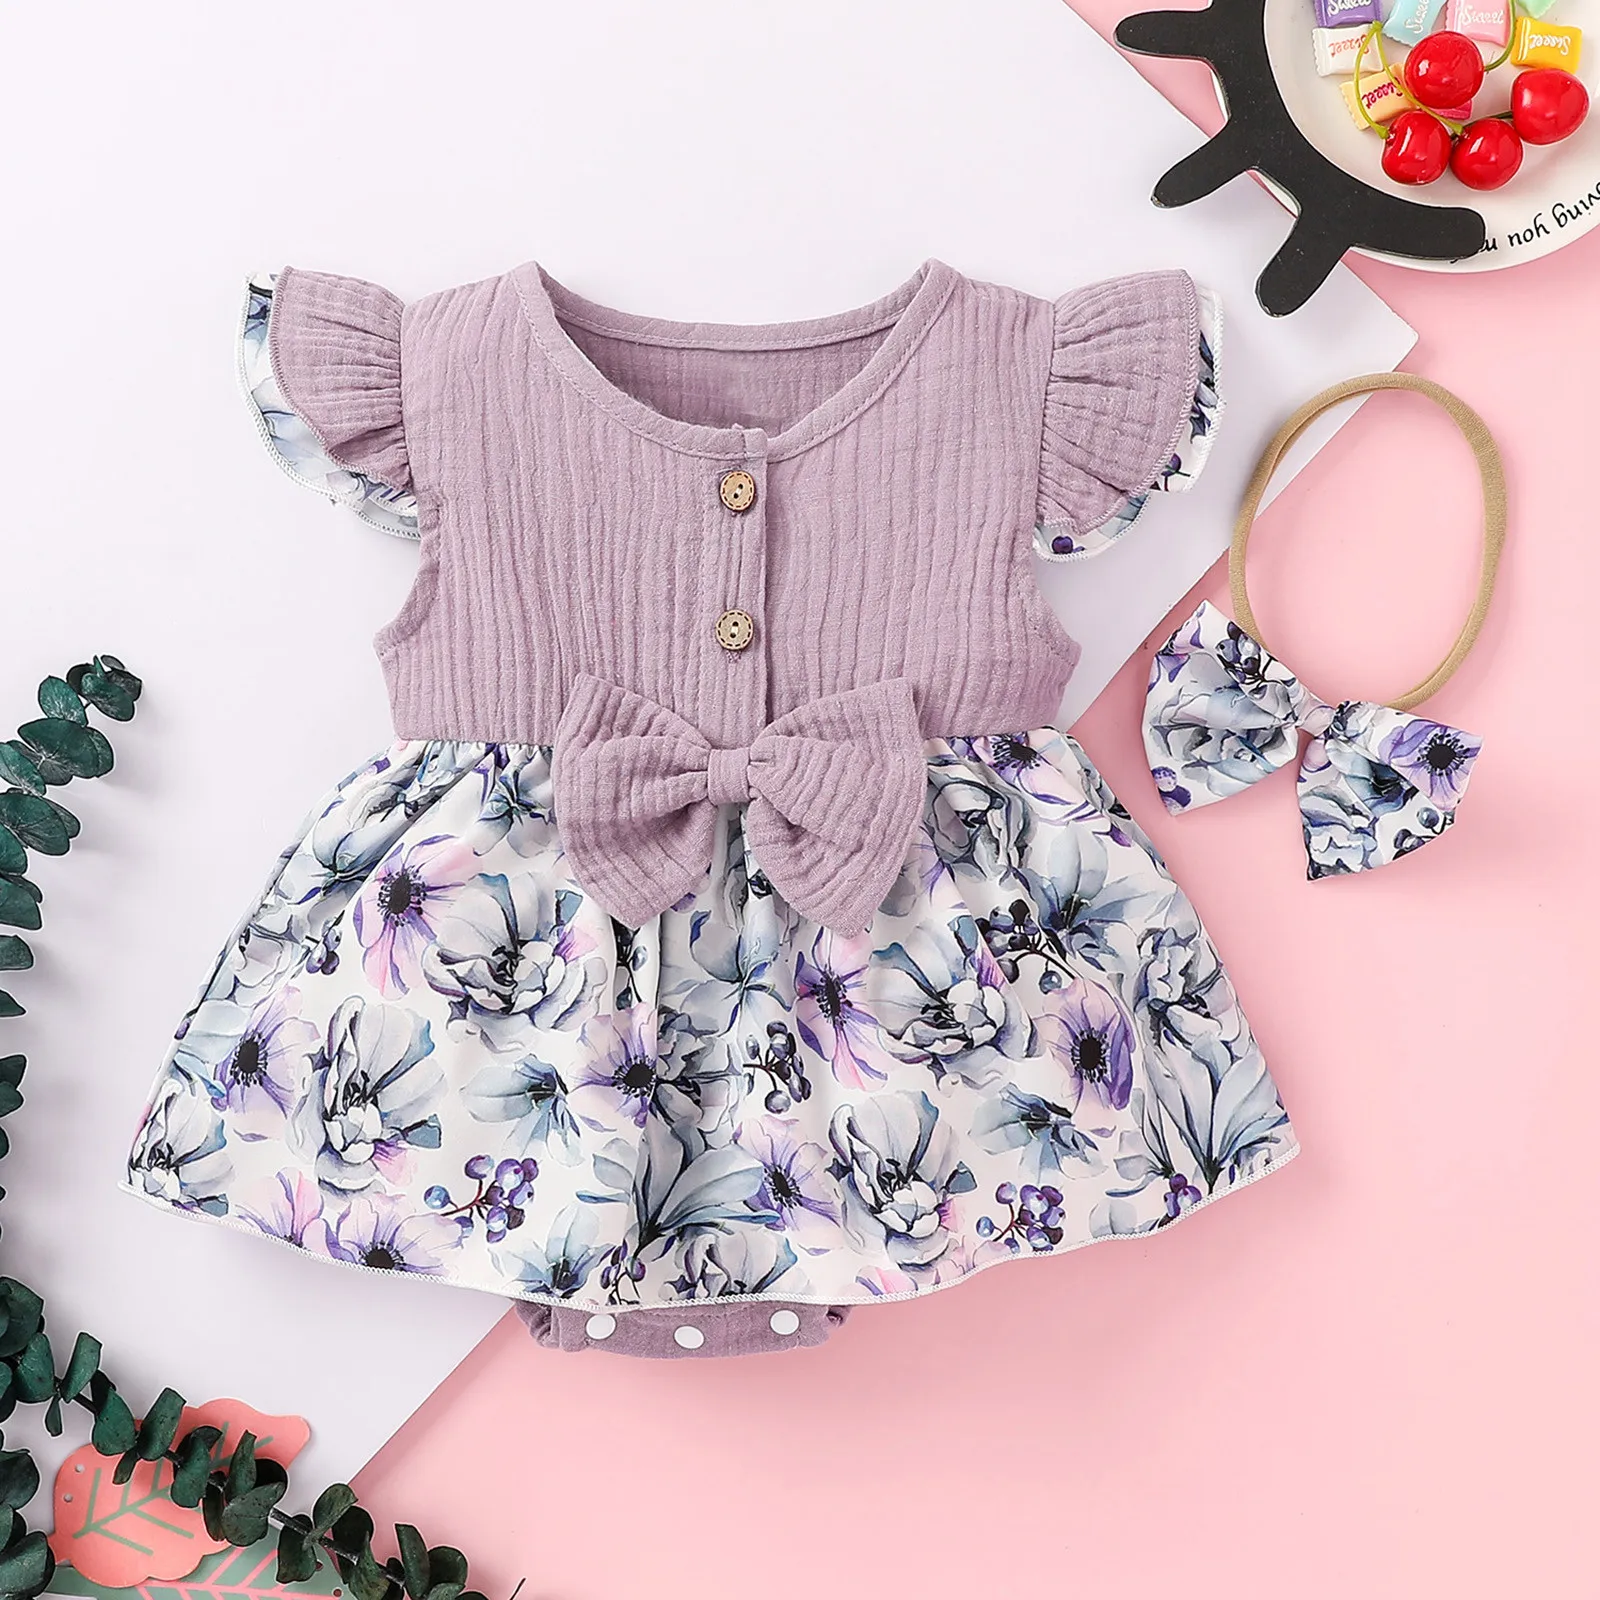 Summer New Baby Girl’s Casual Fly Sleeve Romper Cotton Linen Fresh Floral Printed Backless Ruffles Jumpsuits Infant Clothes 4